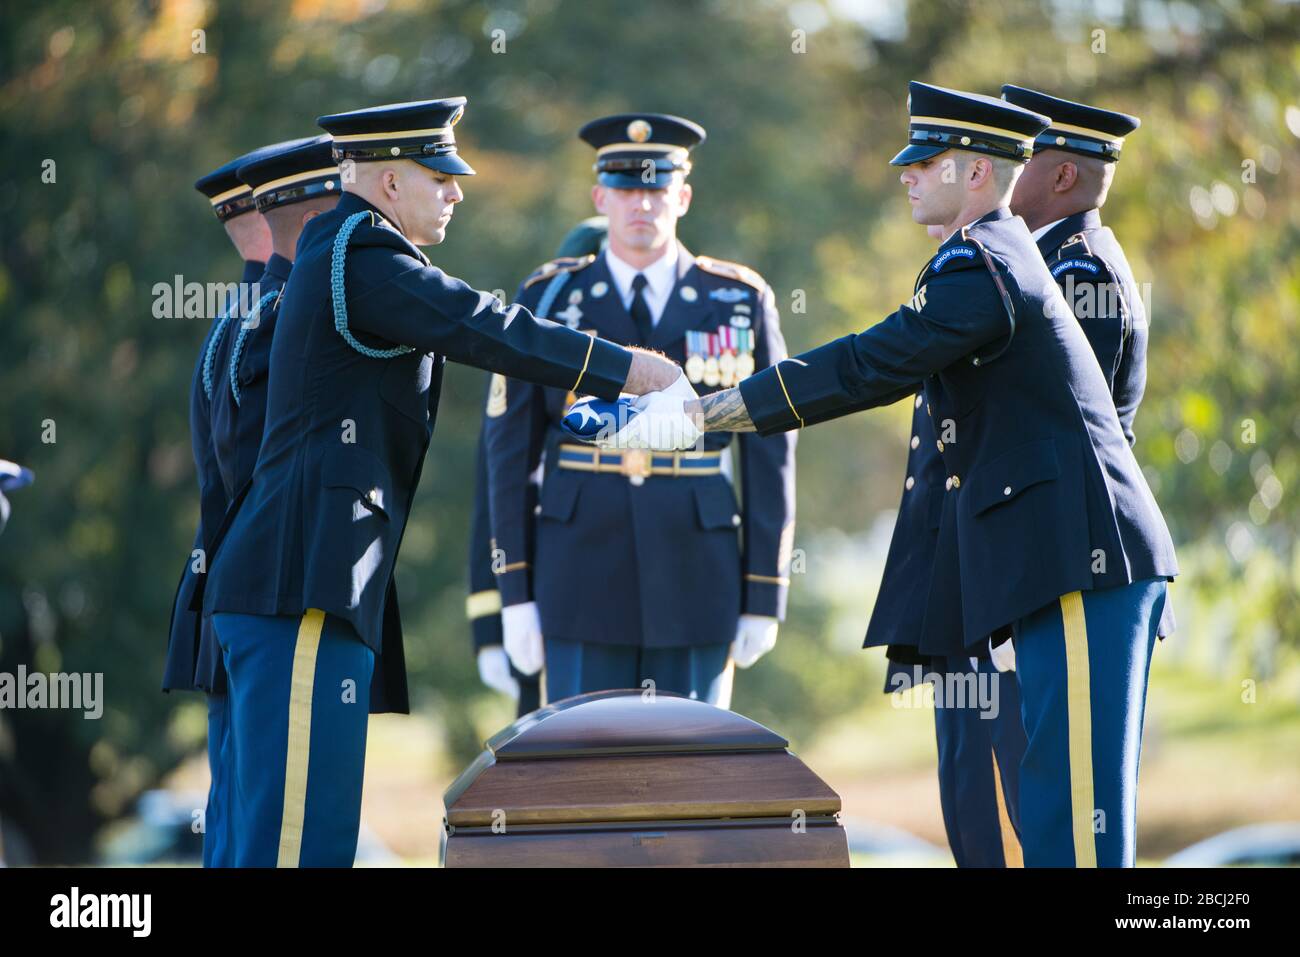 'The U.S. Army Honor Guard, The 3d U.S. Infantry Regiment (The Old Guard) Caisson Platoon, and The U.S. Army Band, “Pershing’s Own”, conduct the funeral of U.S. Army Staff Sgt. Bryan Black in Section 60 of Arlington National Cemetery, Arlington, Virginia, Oct. 30, 2017.  Black, a native of Puyallup, Washington, was assigned to Company A, 2nd Battalion, 3rd Special Forces Group (Airborne) on Fort Bragg, North Carolina when he died from wounds sustained during enemy contact in the country of Niger in West Africa, Oct. 4, 2017.  Ryan McCarthy, acting secretary, U.S. Army; Gen. Mark Milley, chief Stock Photo